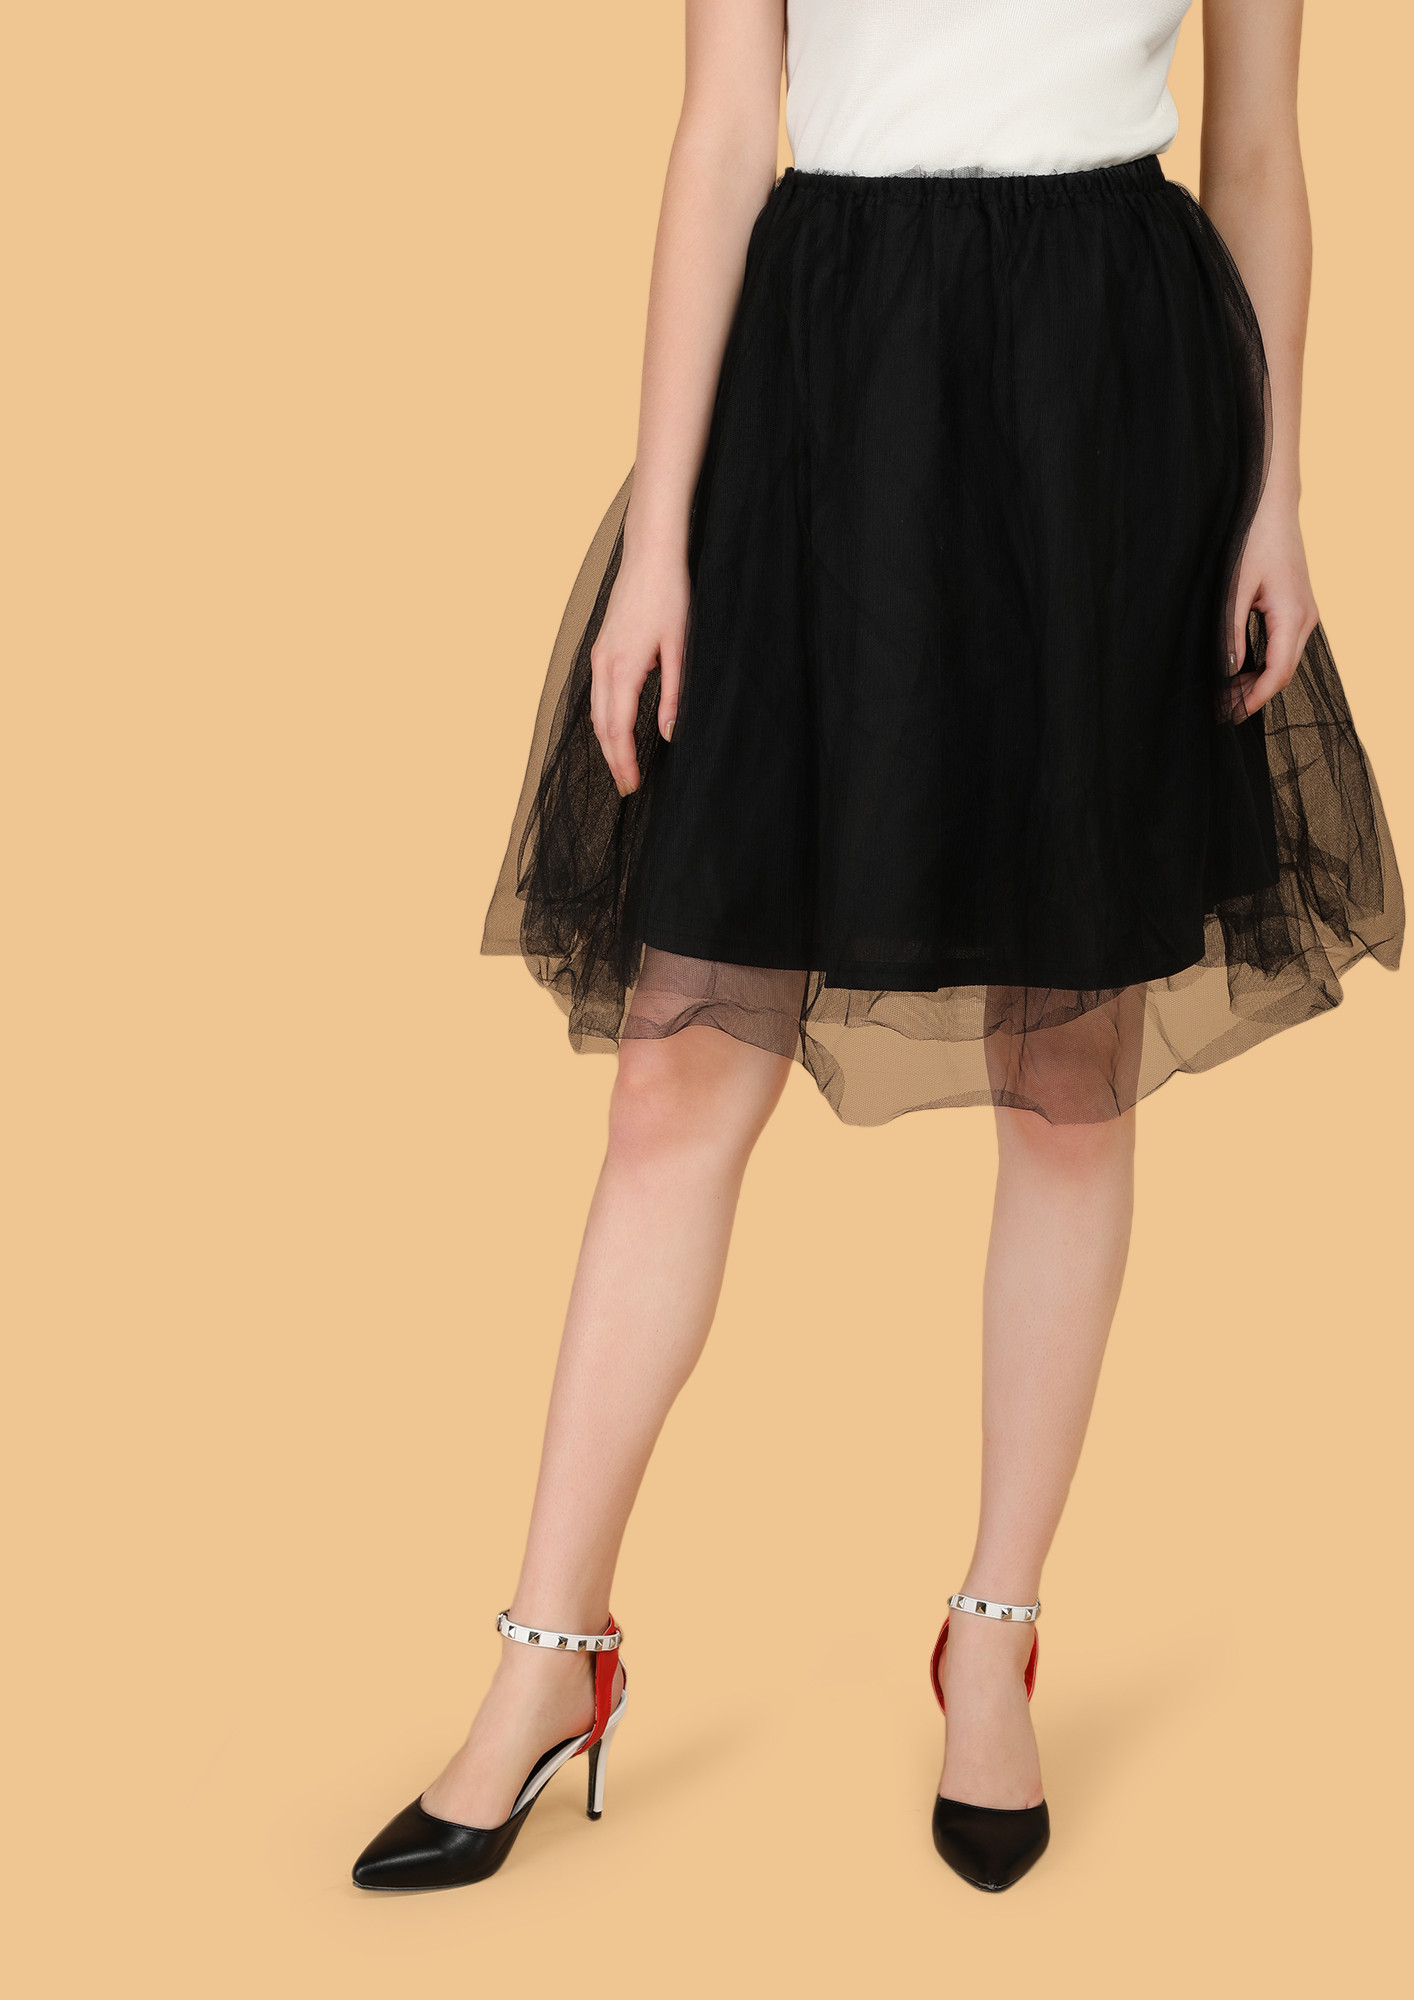 DANCE WITH ME BABY BLACK TULLE SKIRT